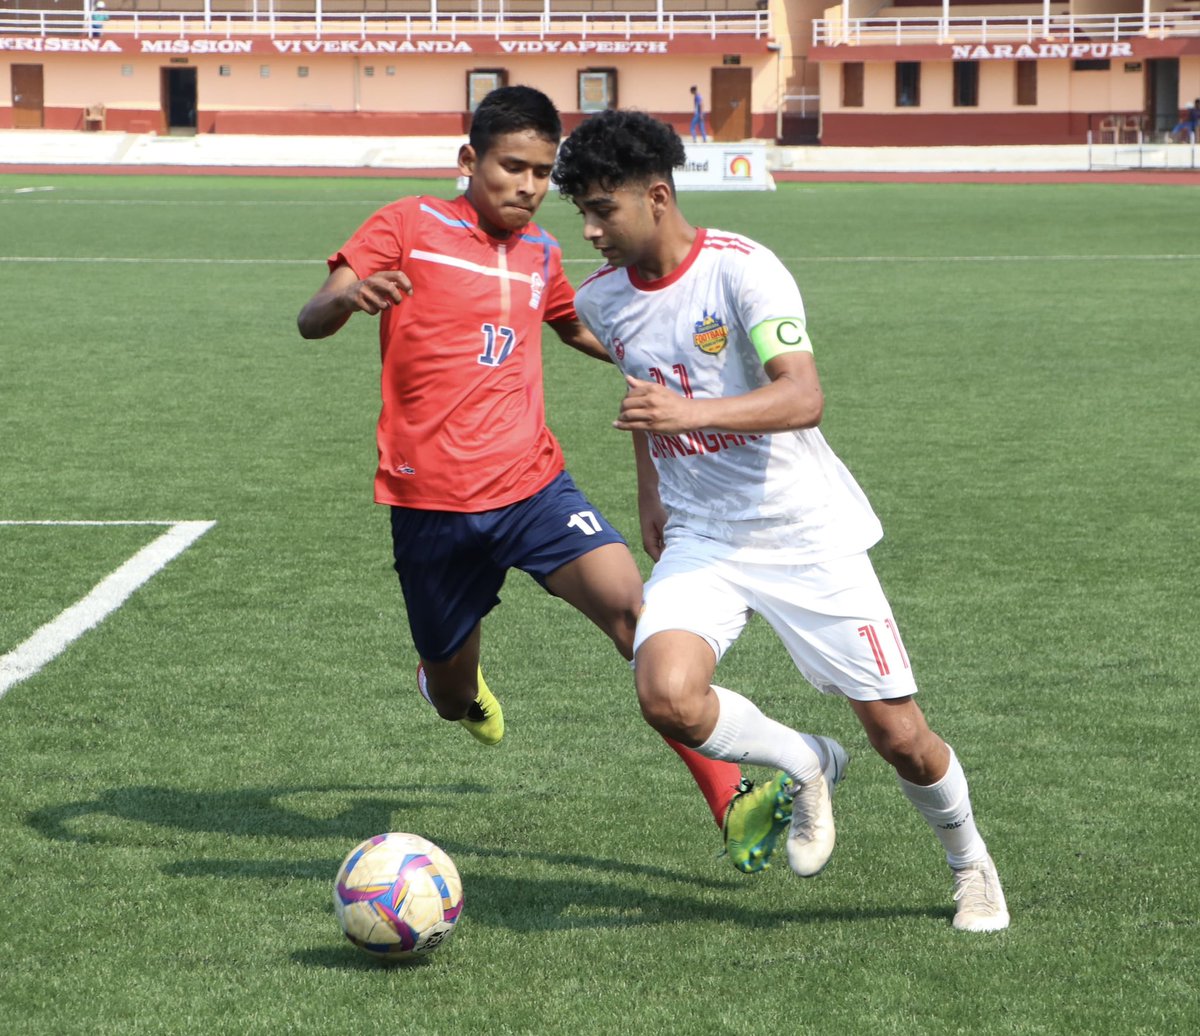 Chandigarh secured their first win in the Swami Vivekananda U20 Men's NFC with an impressive 7-2 victory over Himachal Pradesh! ⚡️ #IndianFootball ⚽️